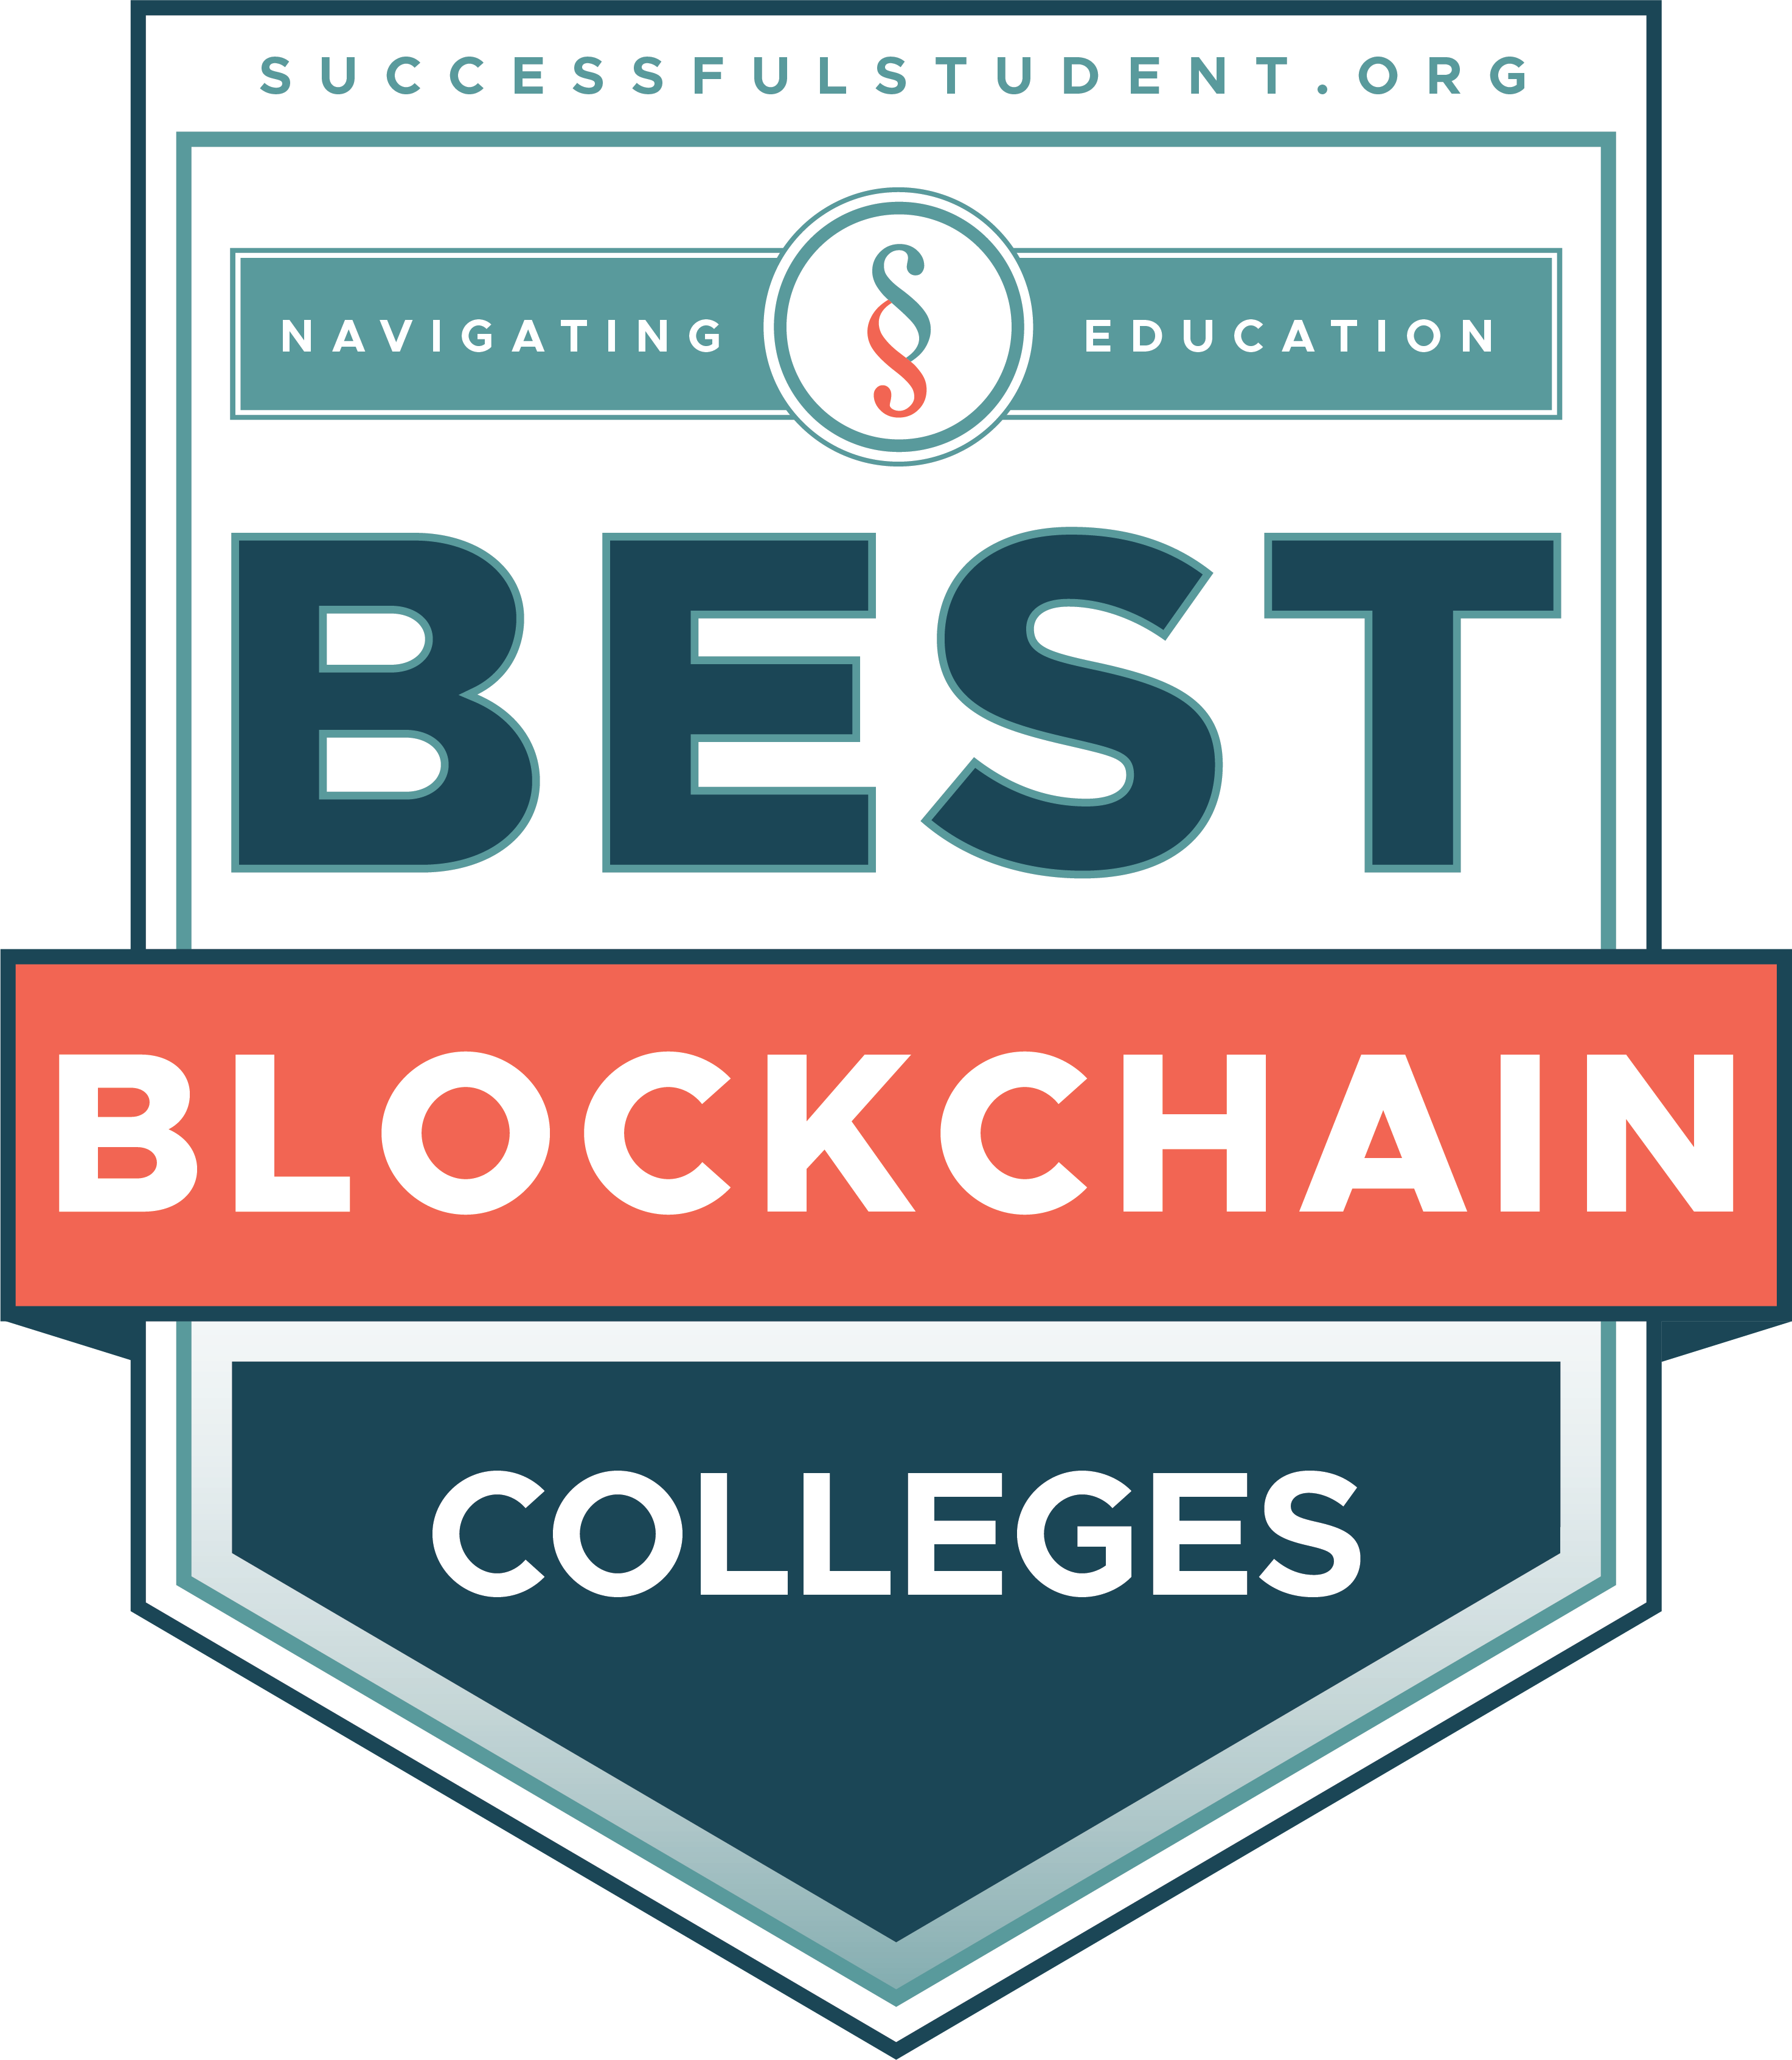 The Best Colleges For Blockchain Education's Badge